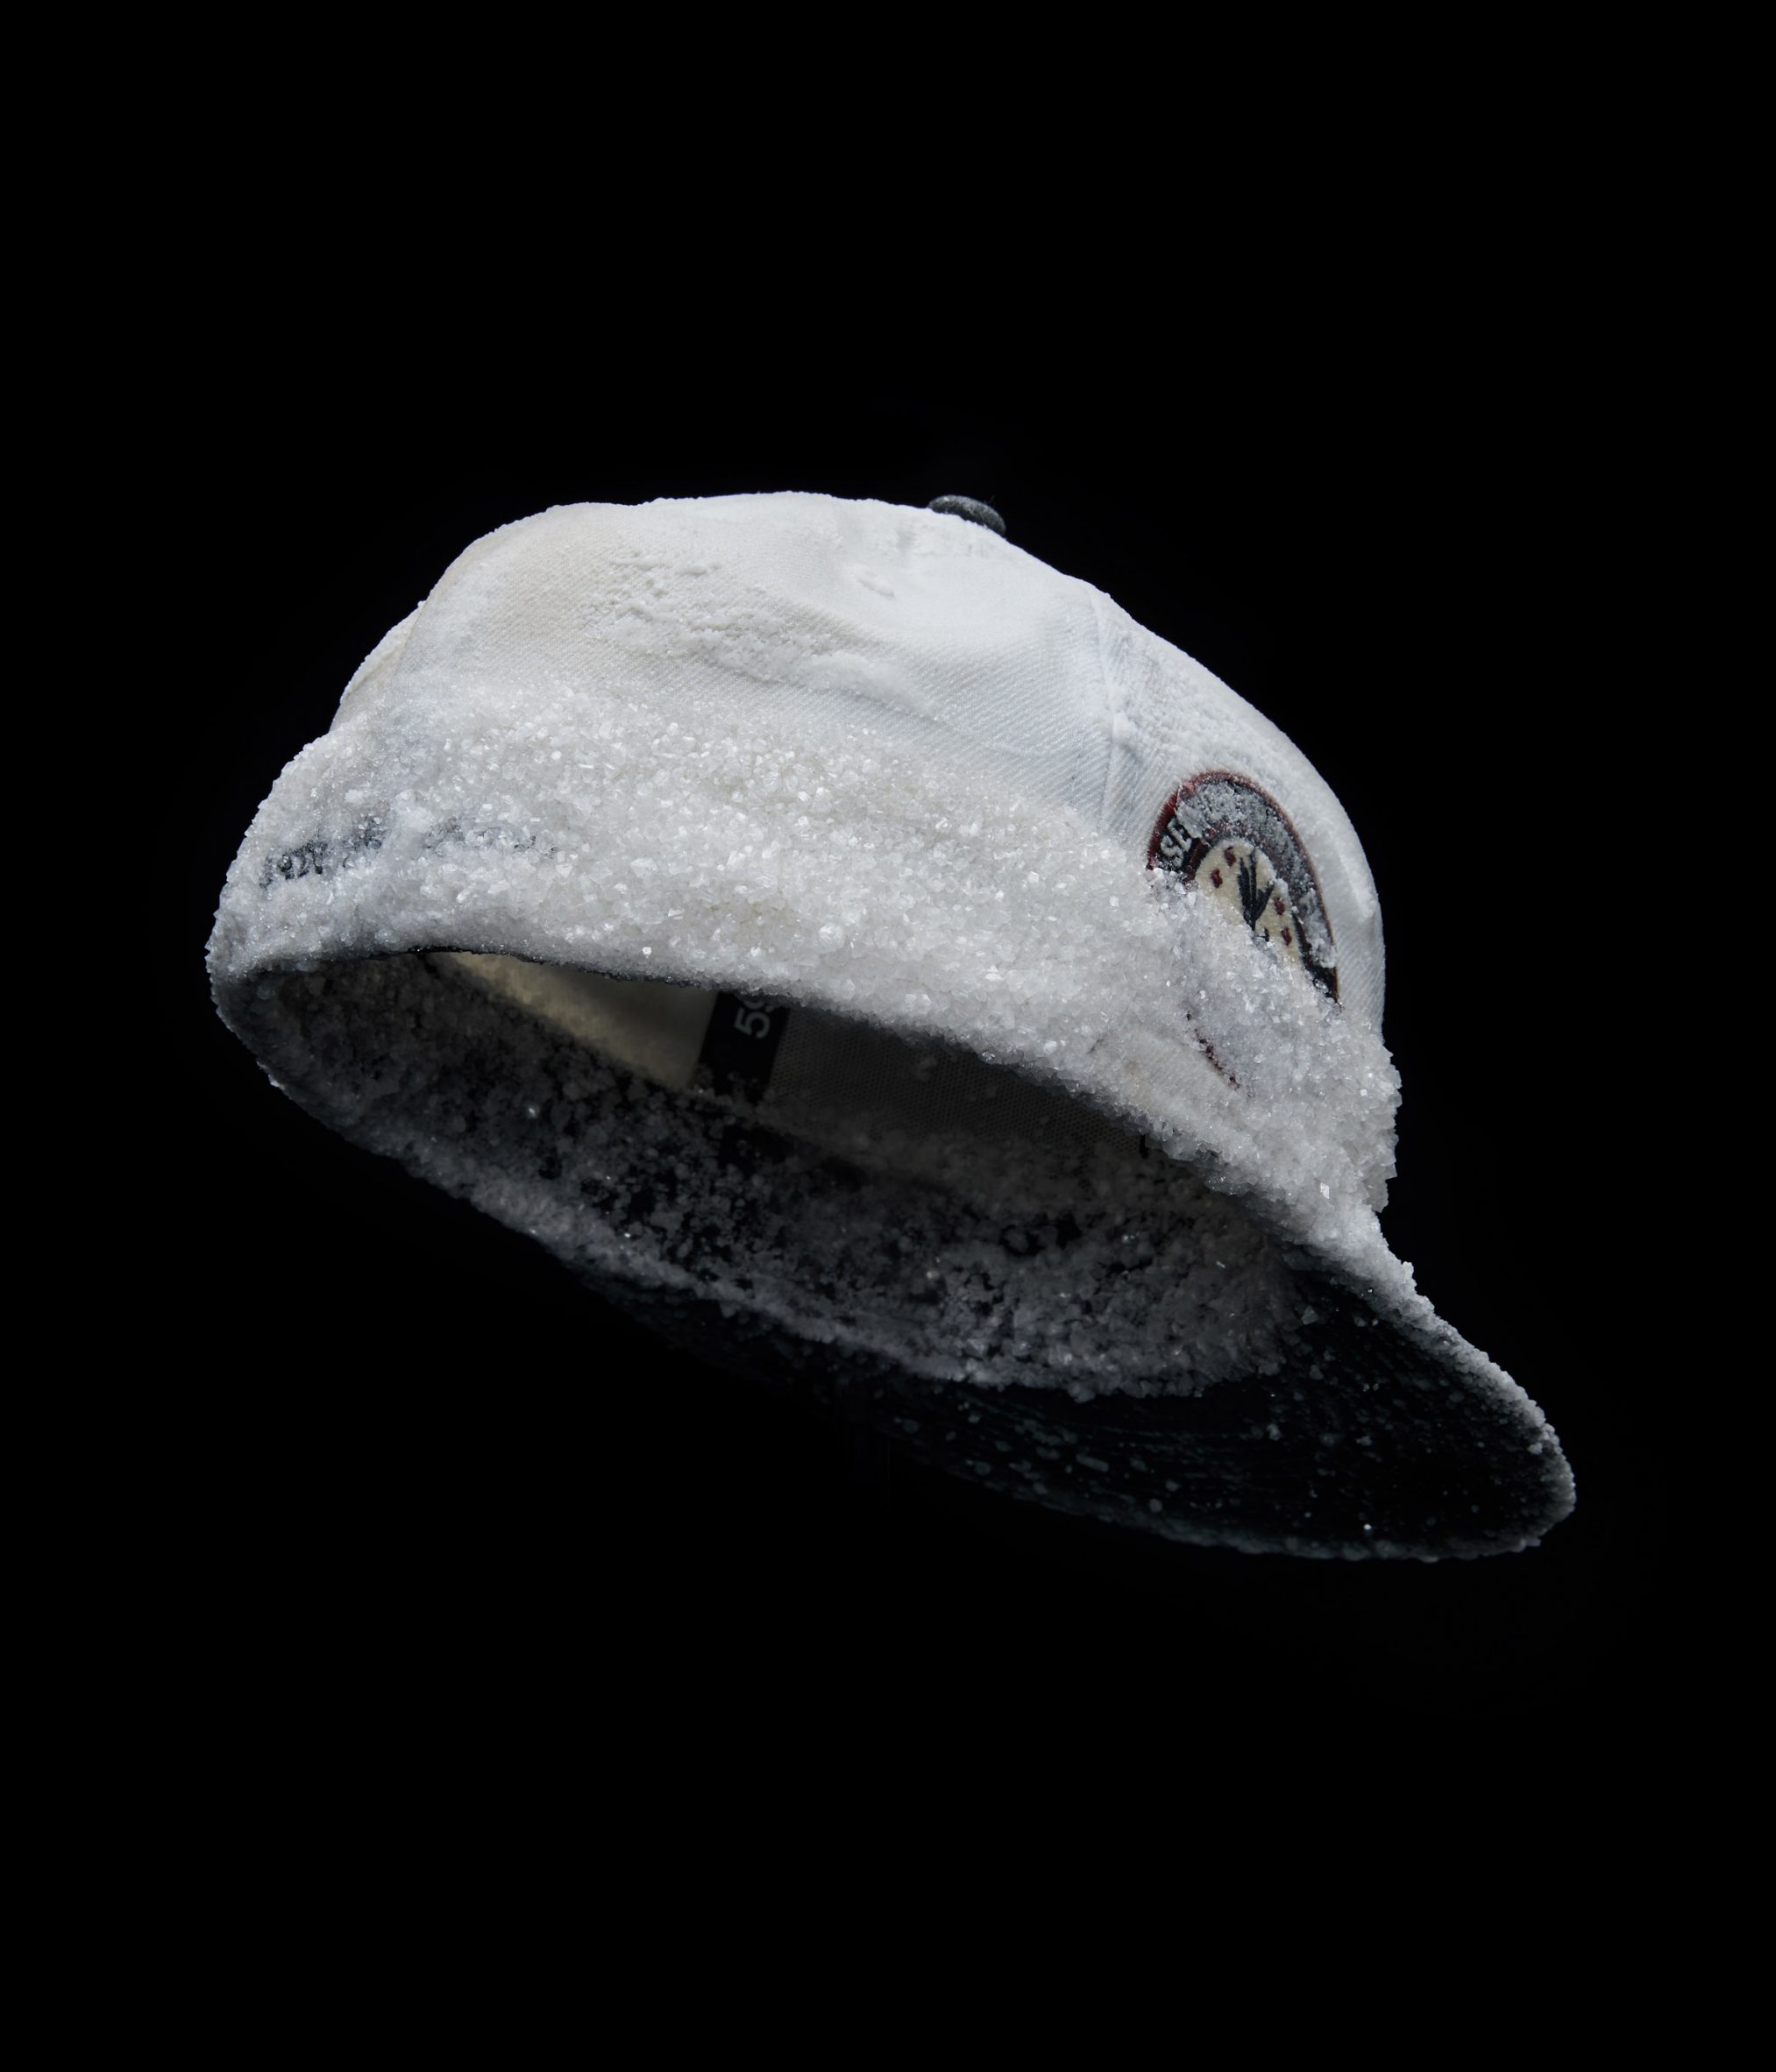 Alice Potts makes baseball caps with crystals made from human sweat